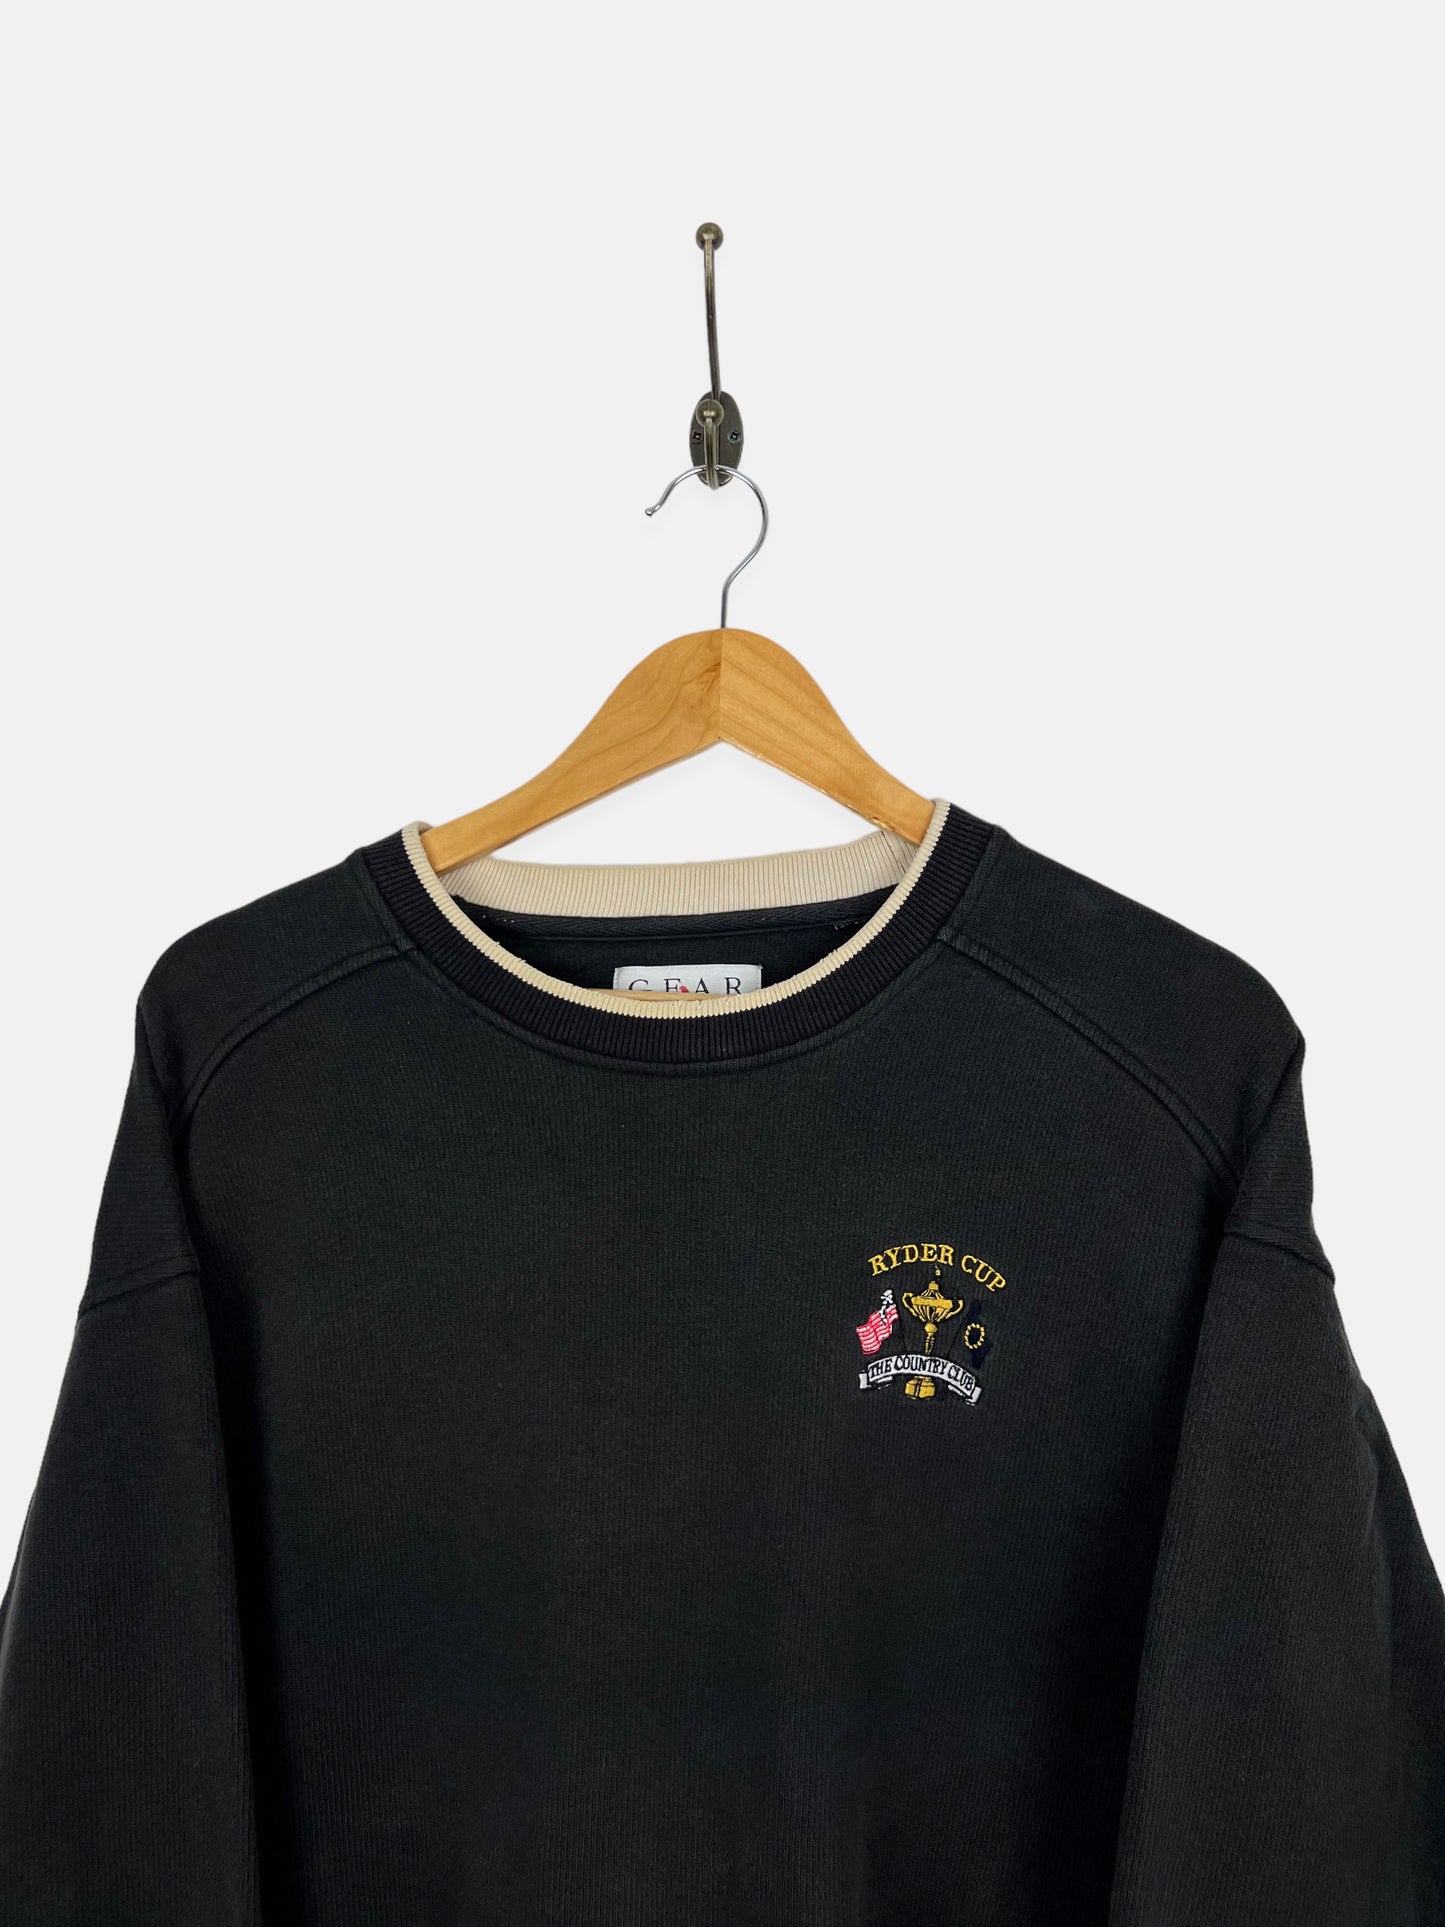 90's Ryder Cup USA Made Embroidered Vintage Sweatshirt Size M-L